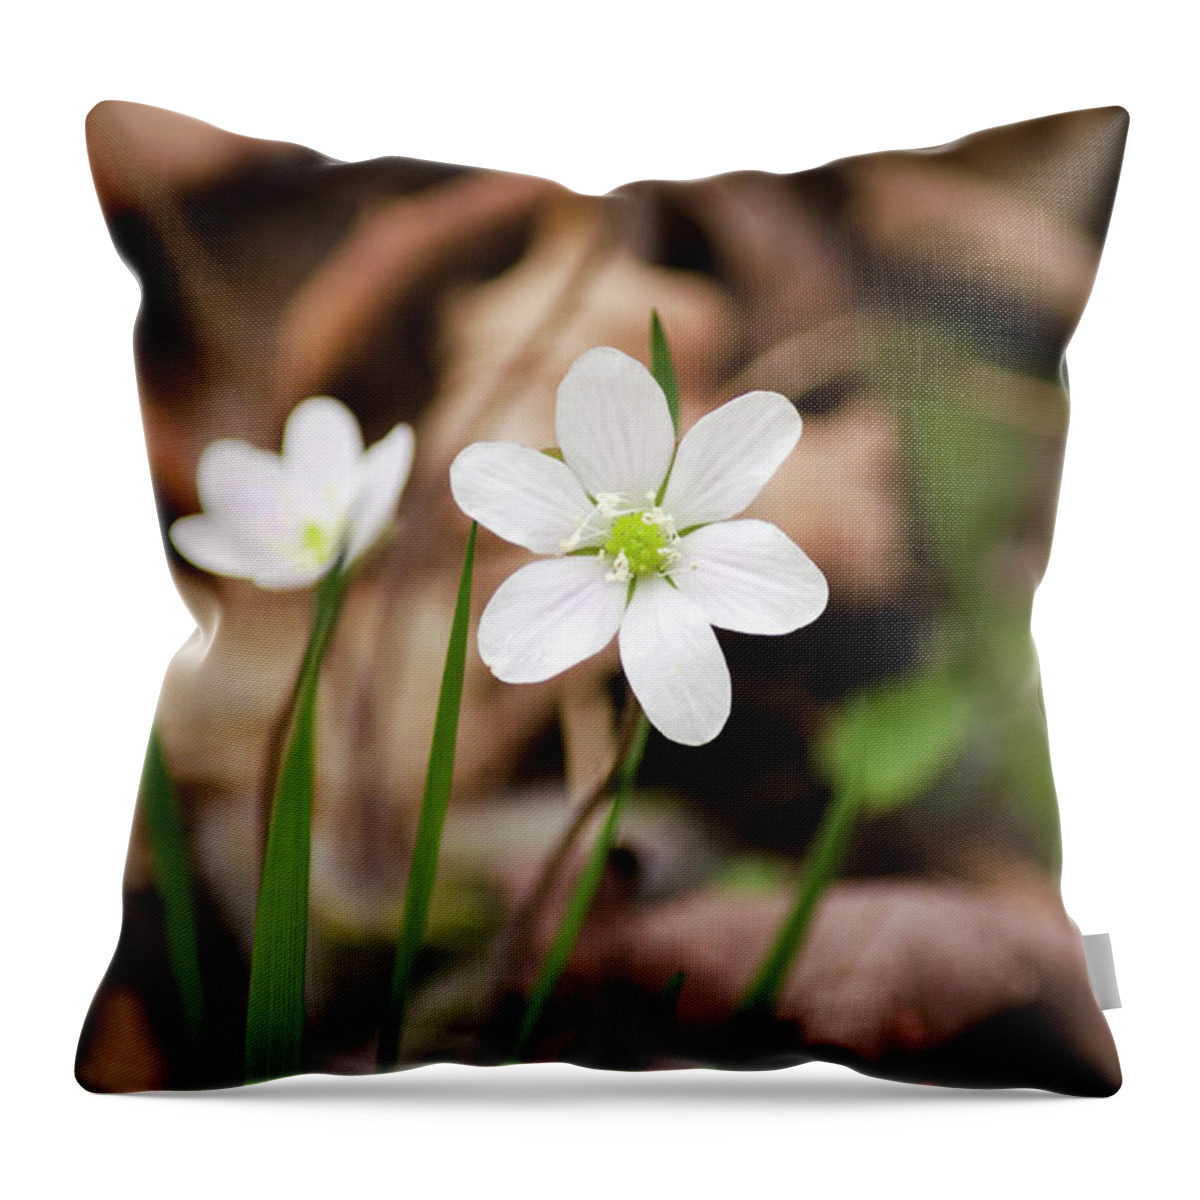 Wildflowers Throw Pillow featuring the photograph Hepatica Wildflowers by Christina Rollo